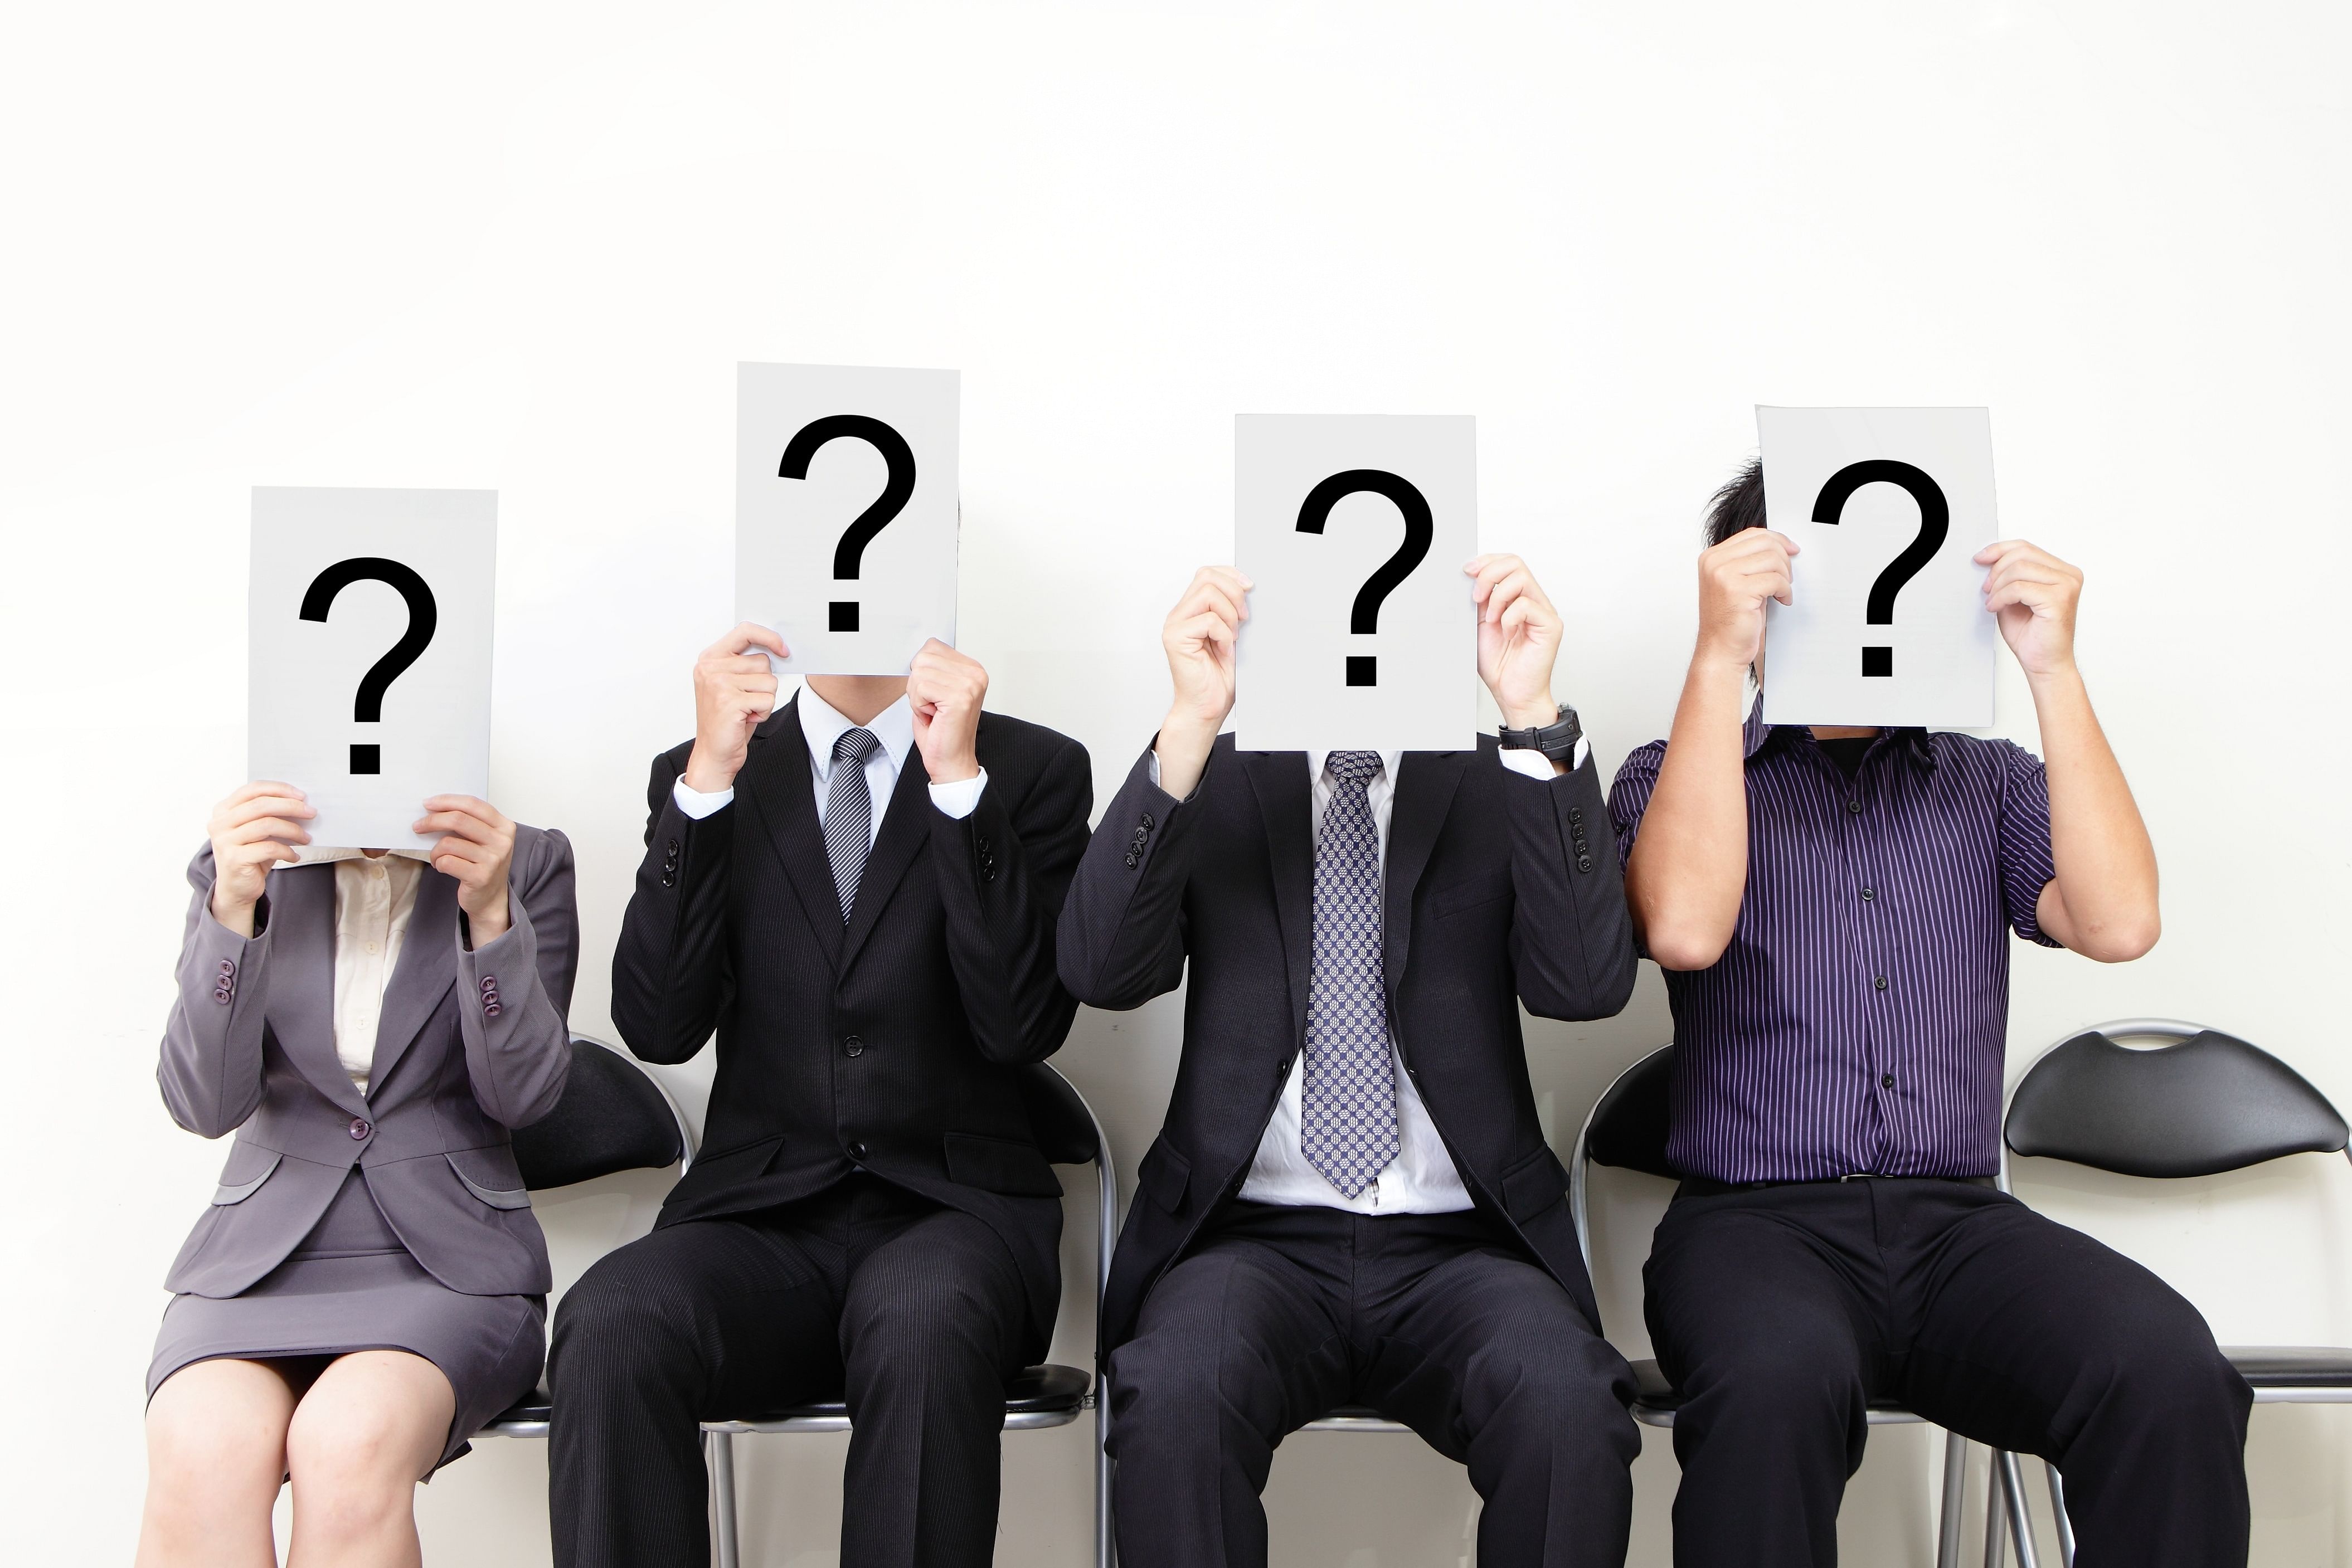 Diffuse these tricky HR questions to nab the job you want Primary tabs